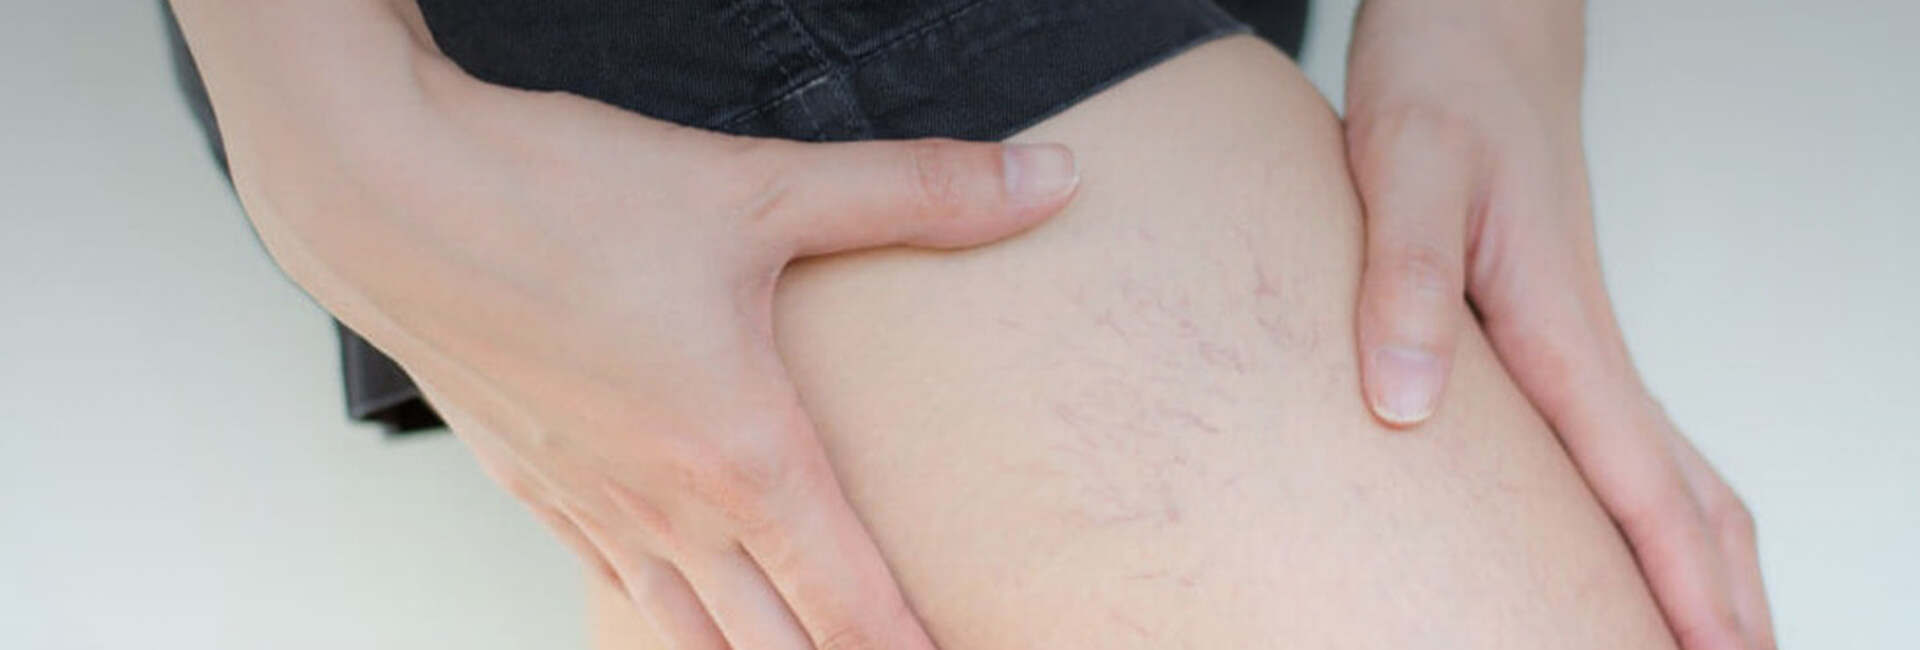 close up of a person showing the veins in their thigh 